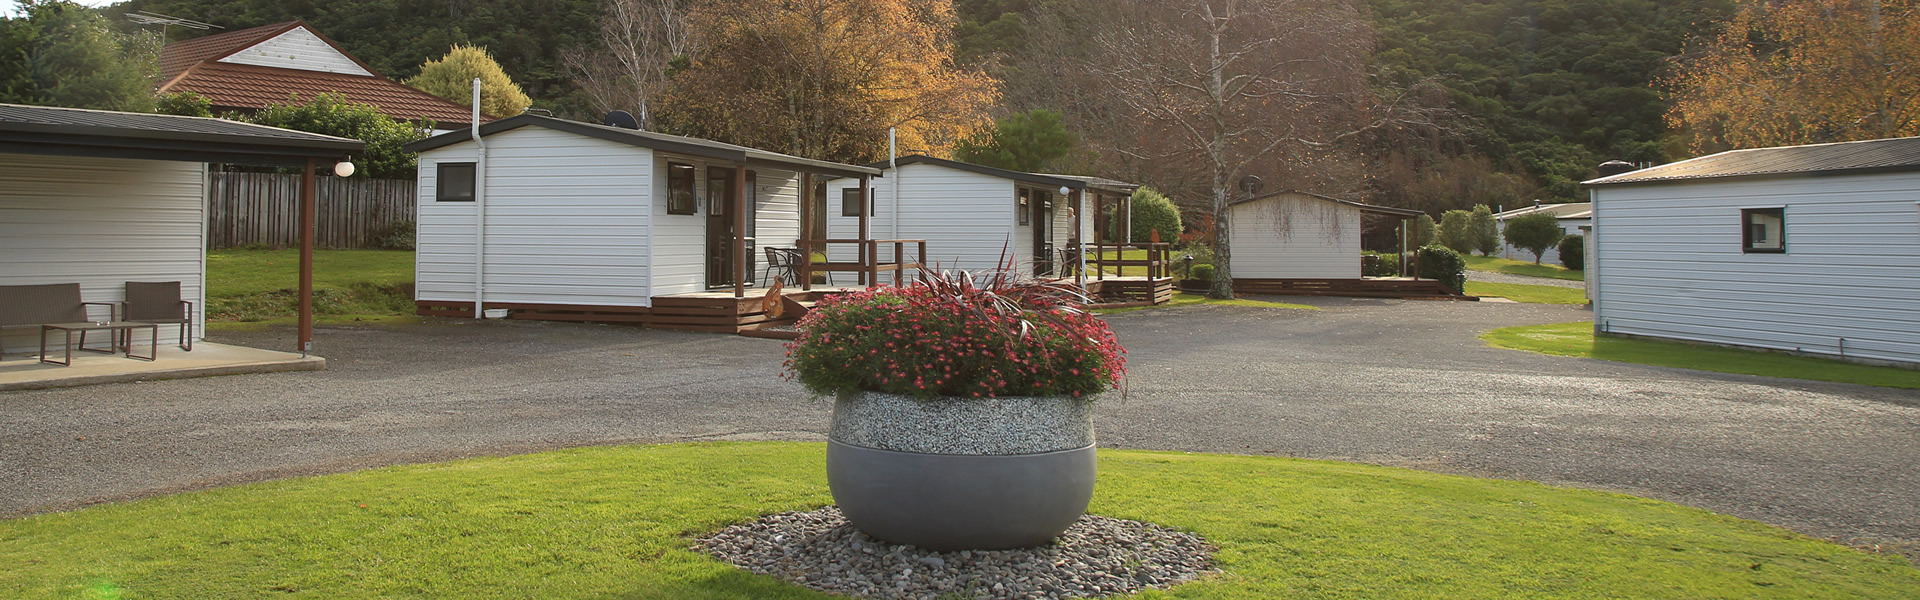 Cabin Accommodation At Parklands Marina Holiday Park In Picton NZ